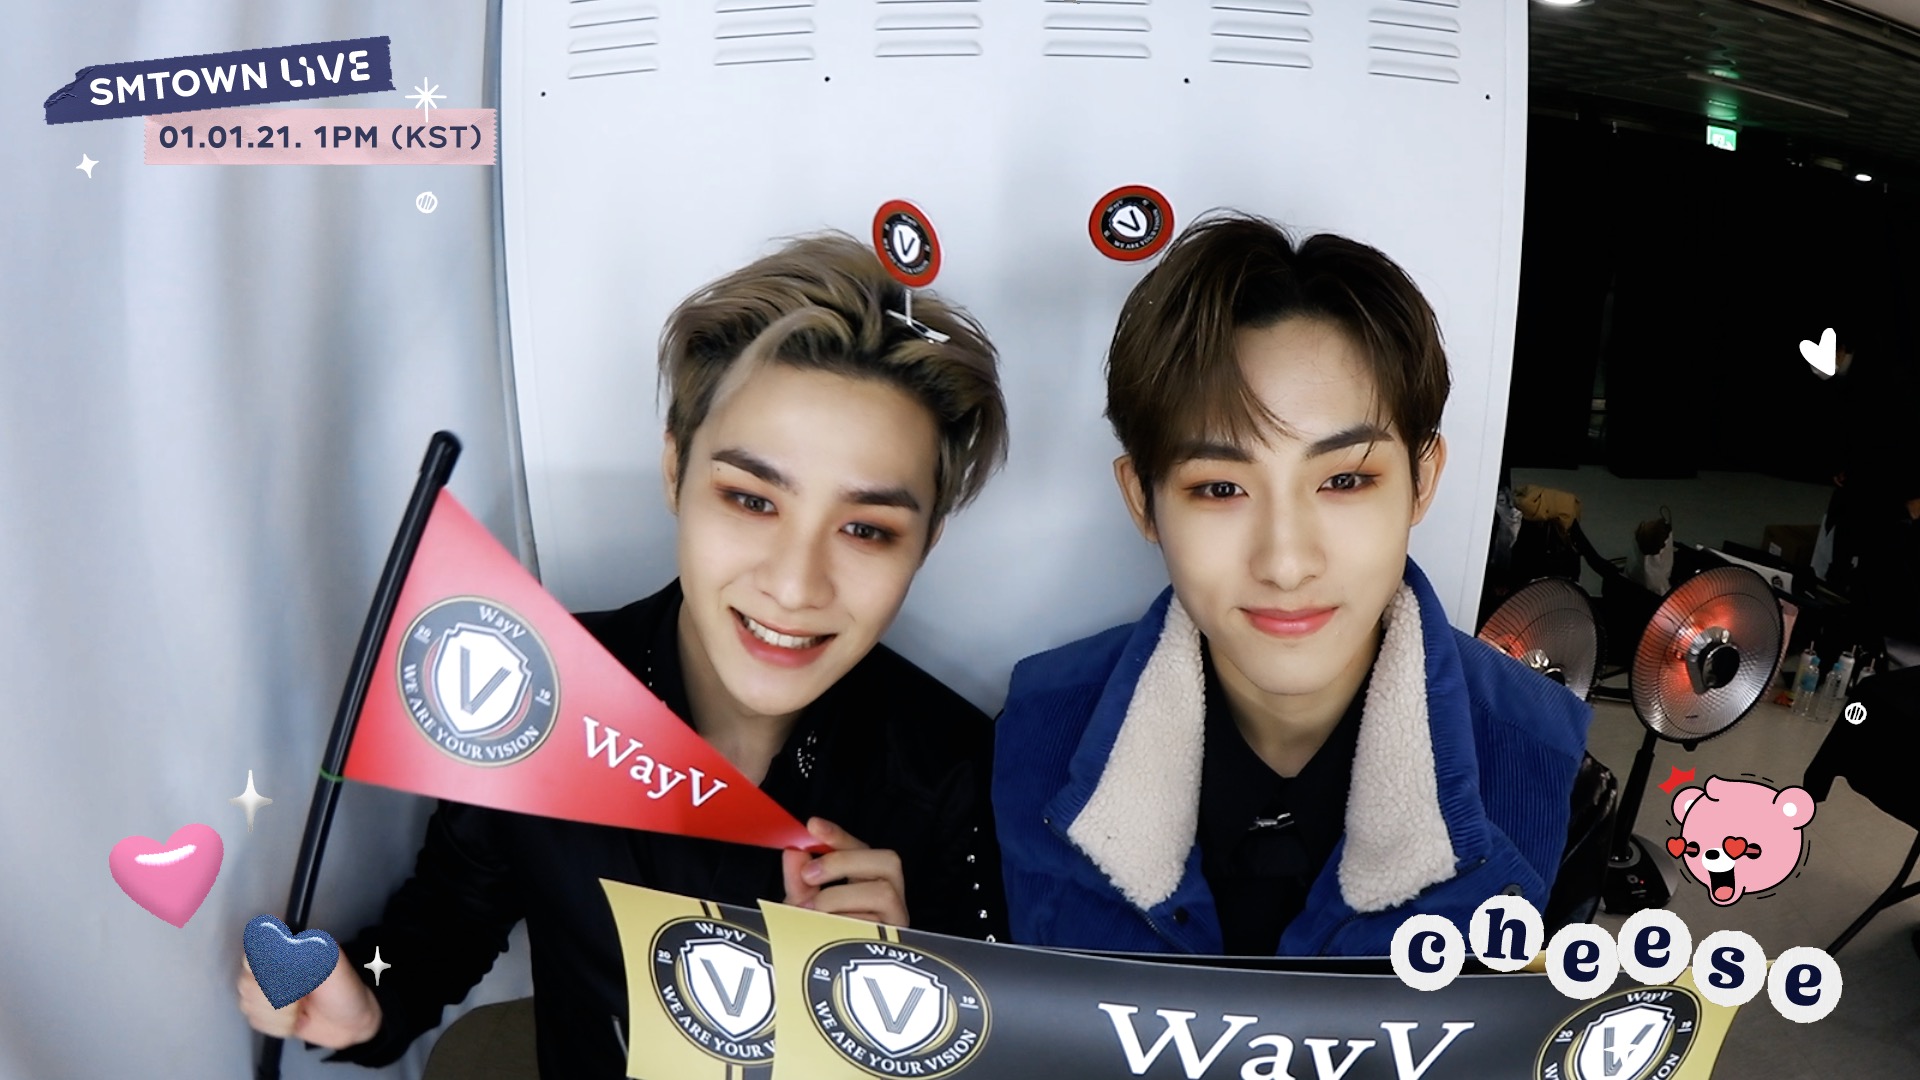 🎟 Let's make a SMTOWN LIVE TICKET with #WayV | 🎫 #WayV 와 티꾸